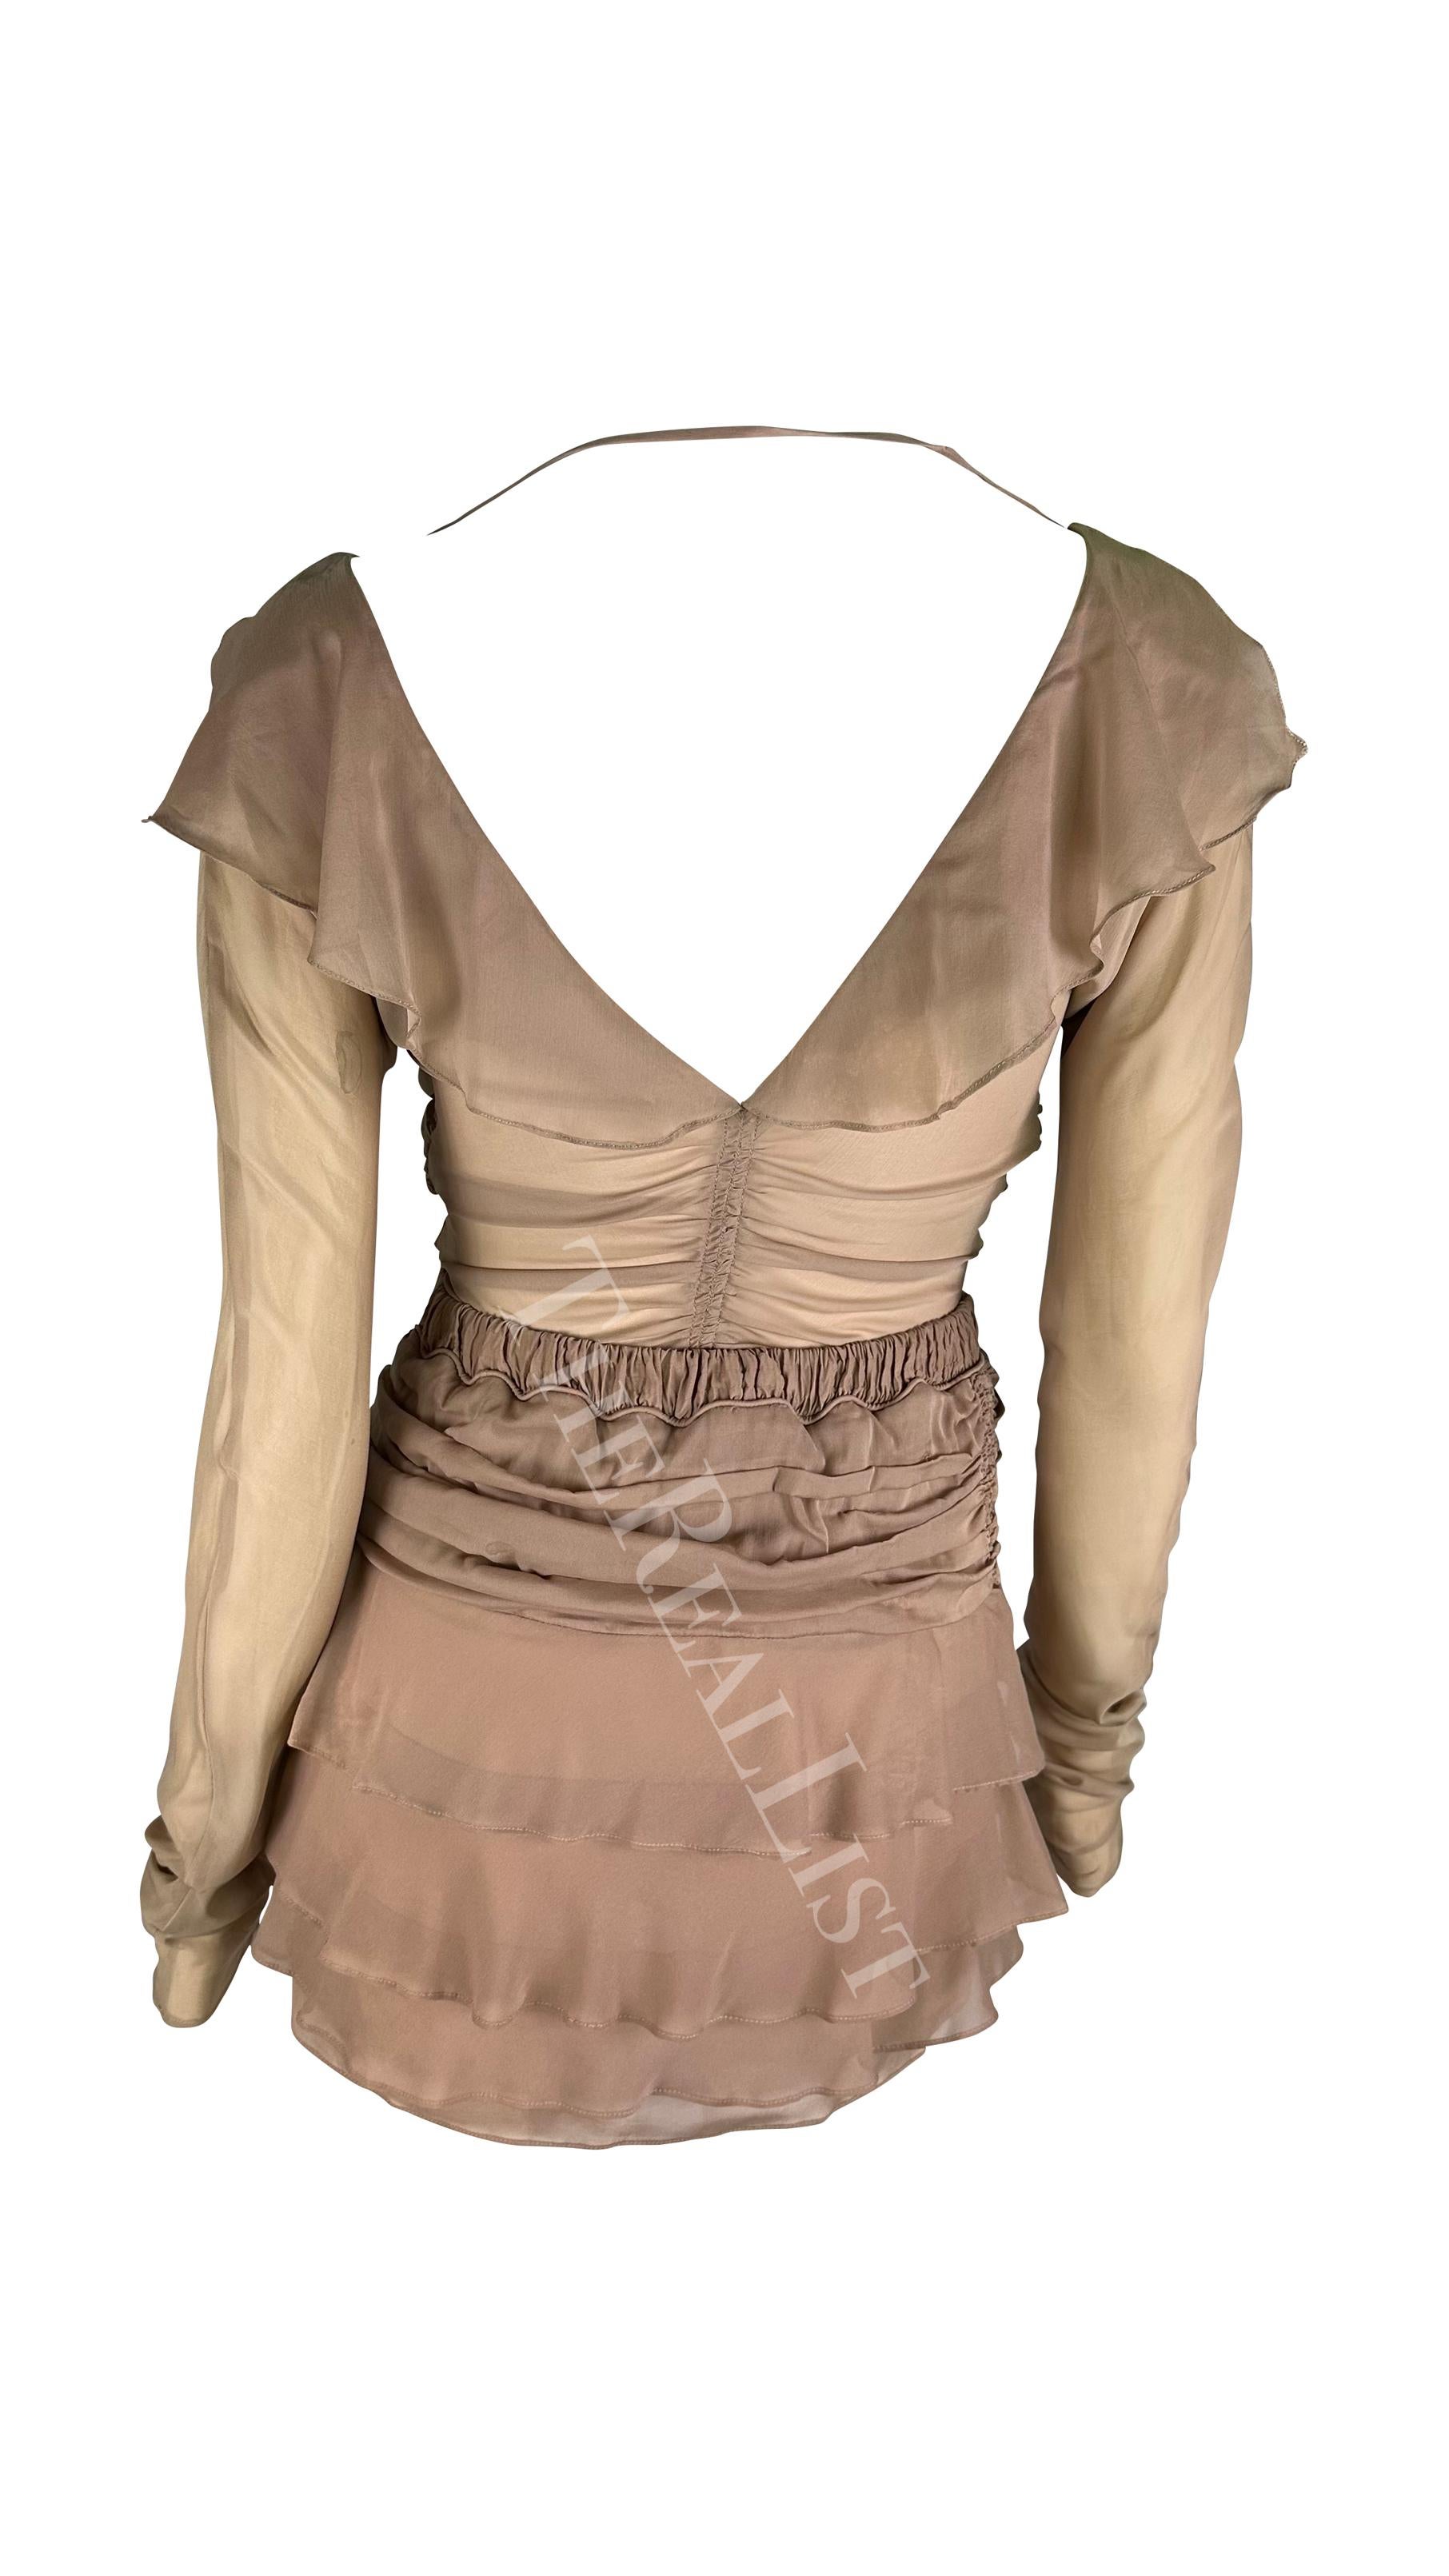 S/S 2003 Gucci by Tom Ford Dusty Pink Beige Sheer Chiffon Ruffle Skirt Set For Sale 5